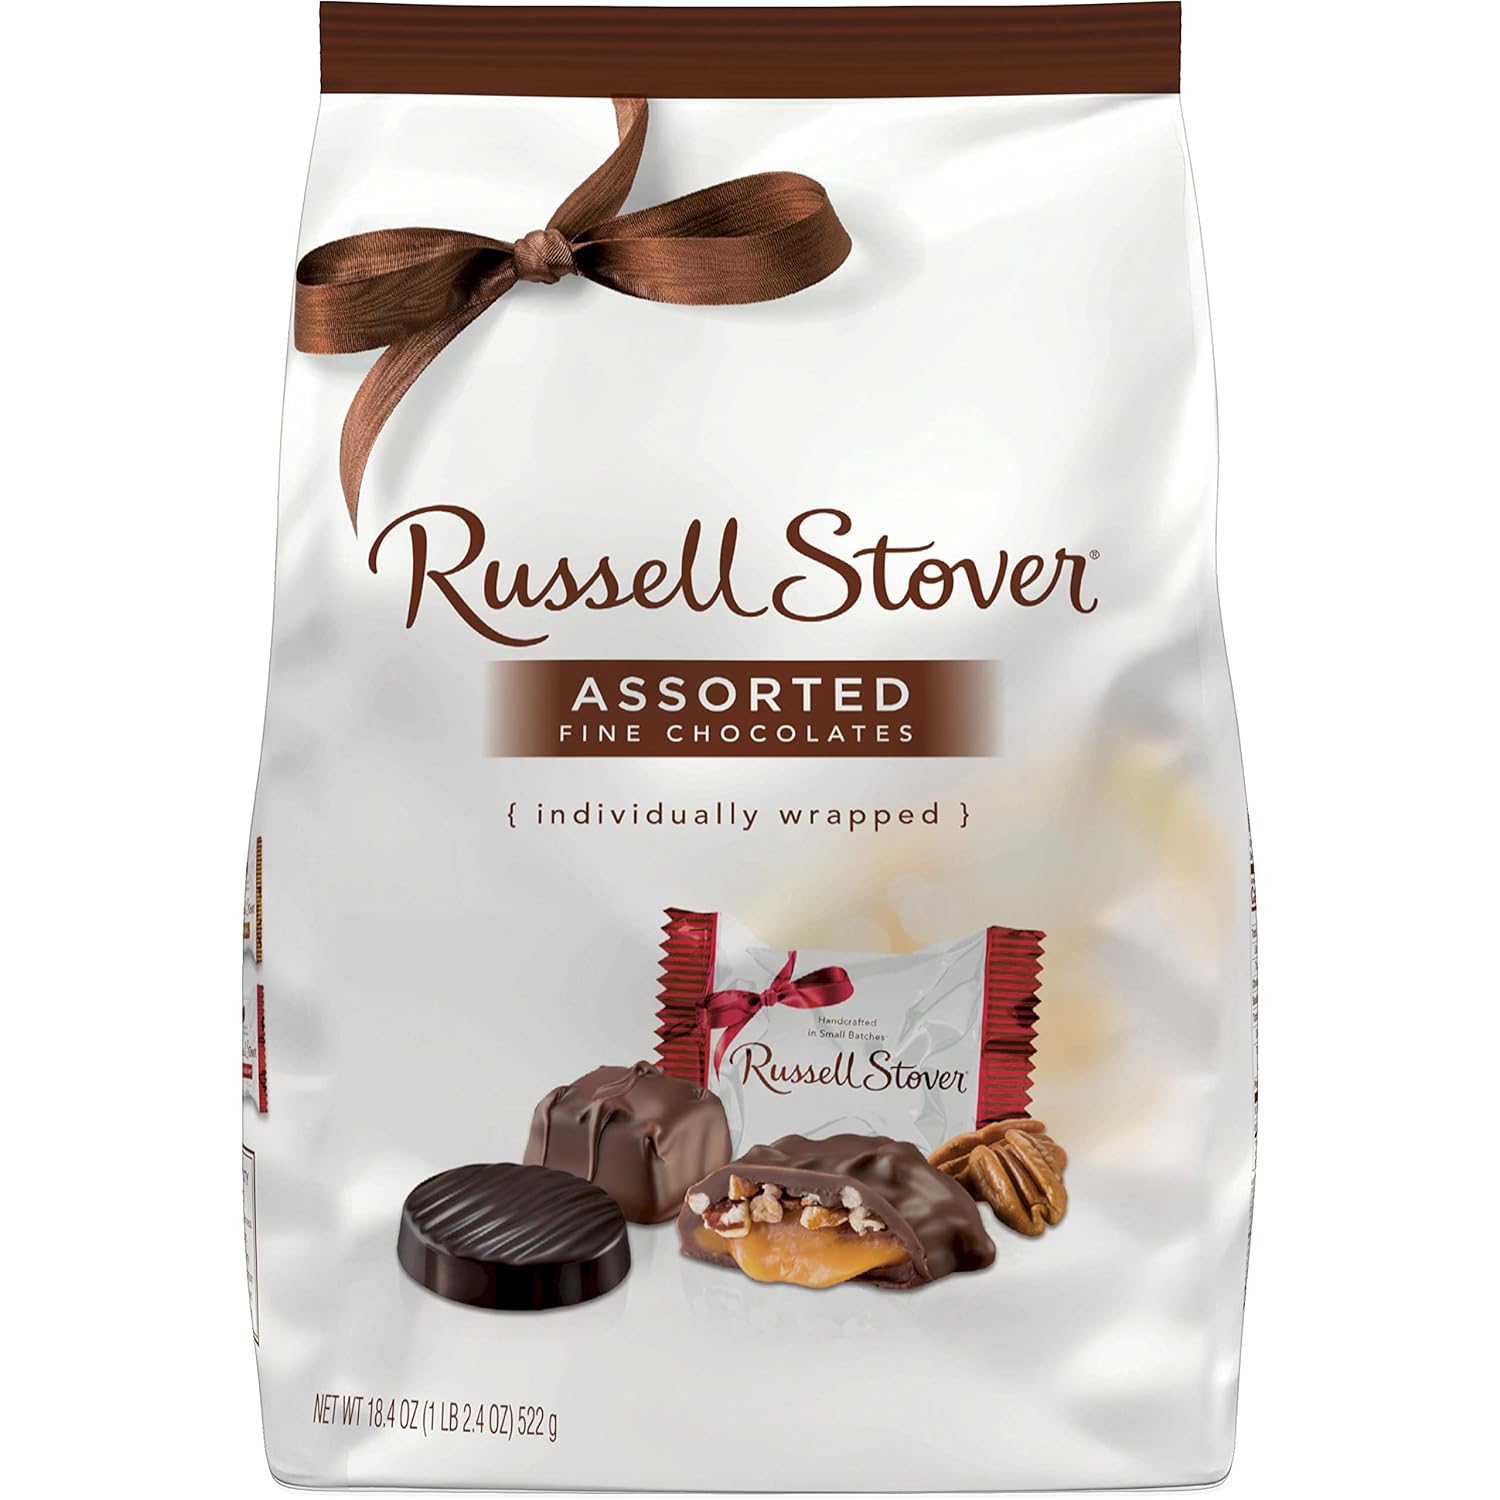 Russell Stover Assorted Chocolates, 18.4 Ounce Bag